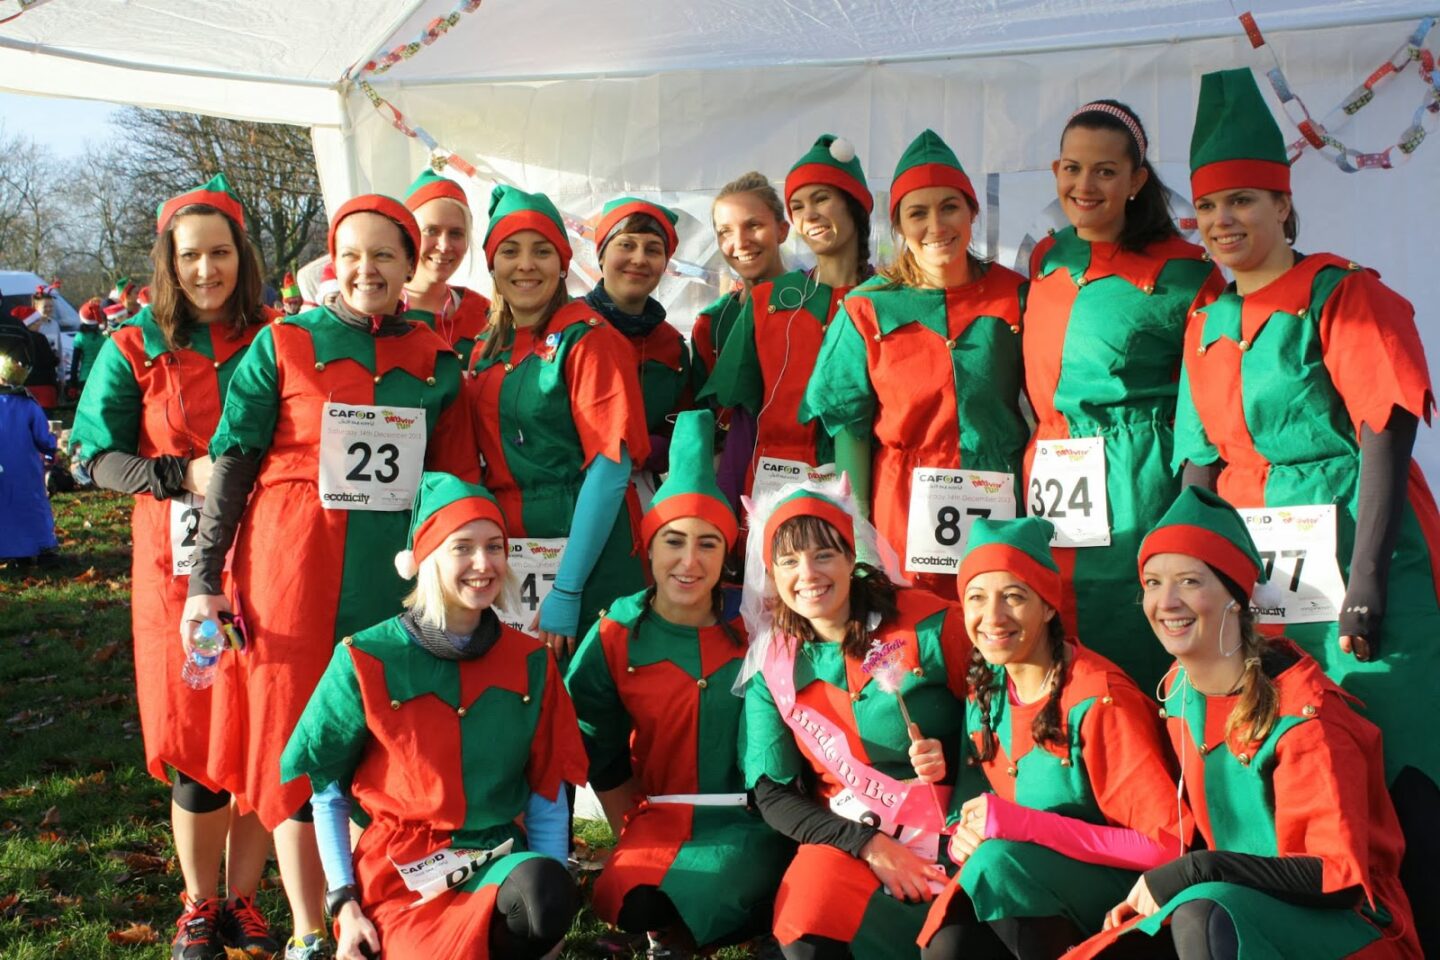 Group of female runners dressed in red and green elf outfits pose for a group photo